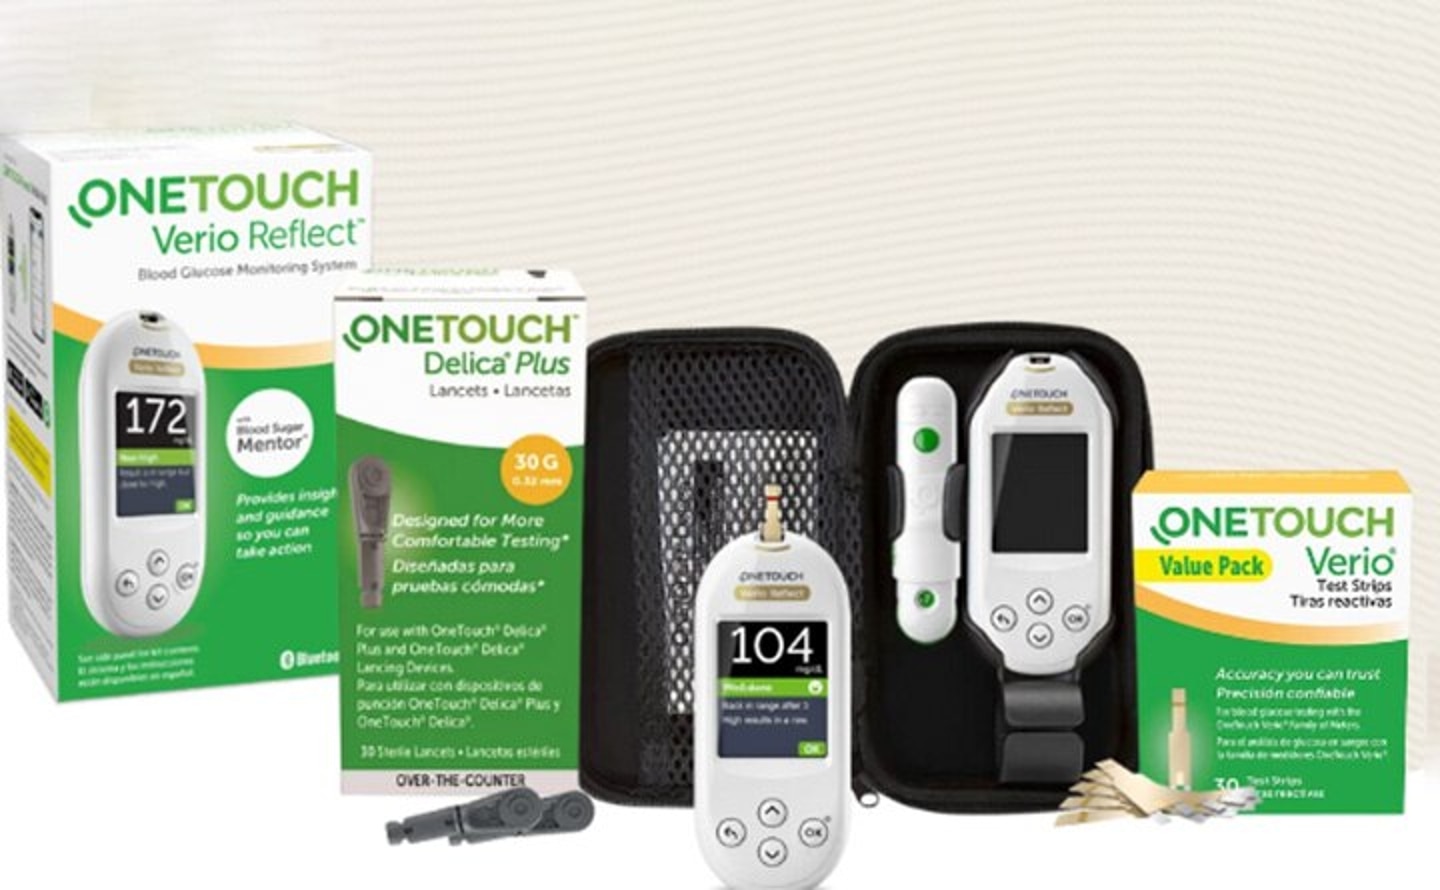 OneTouch Verio Reflect™ meter – Start Checking your Blood Glucose